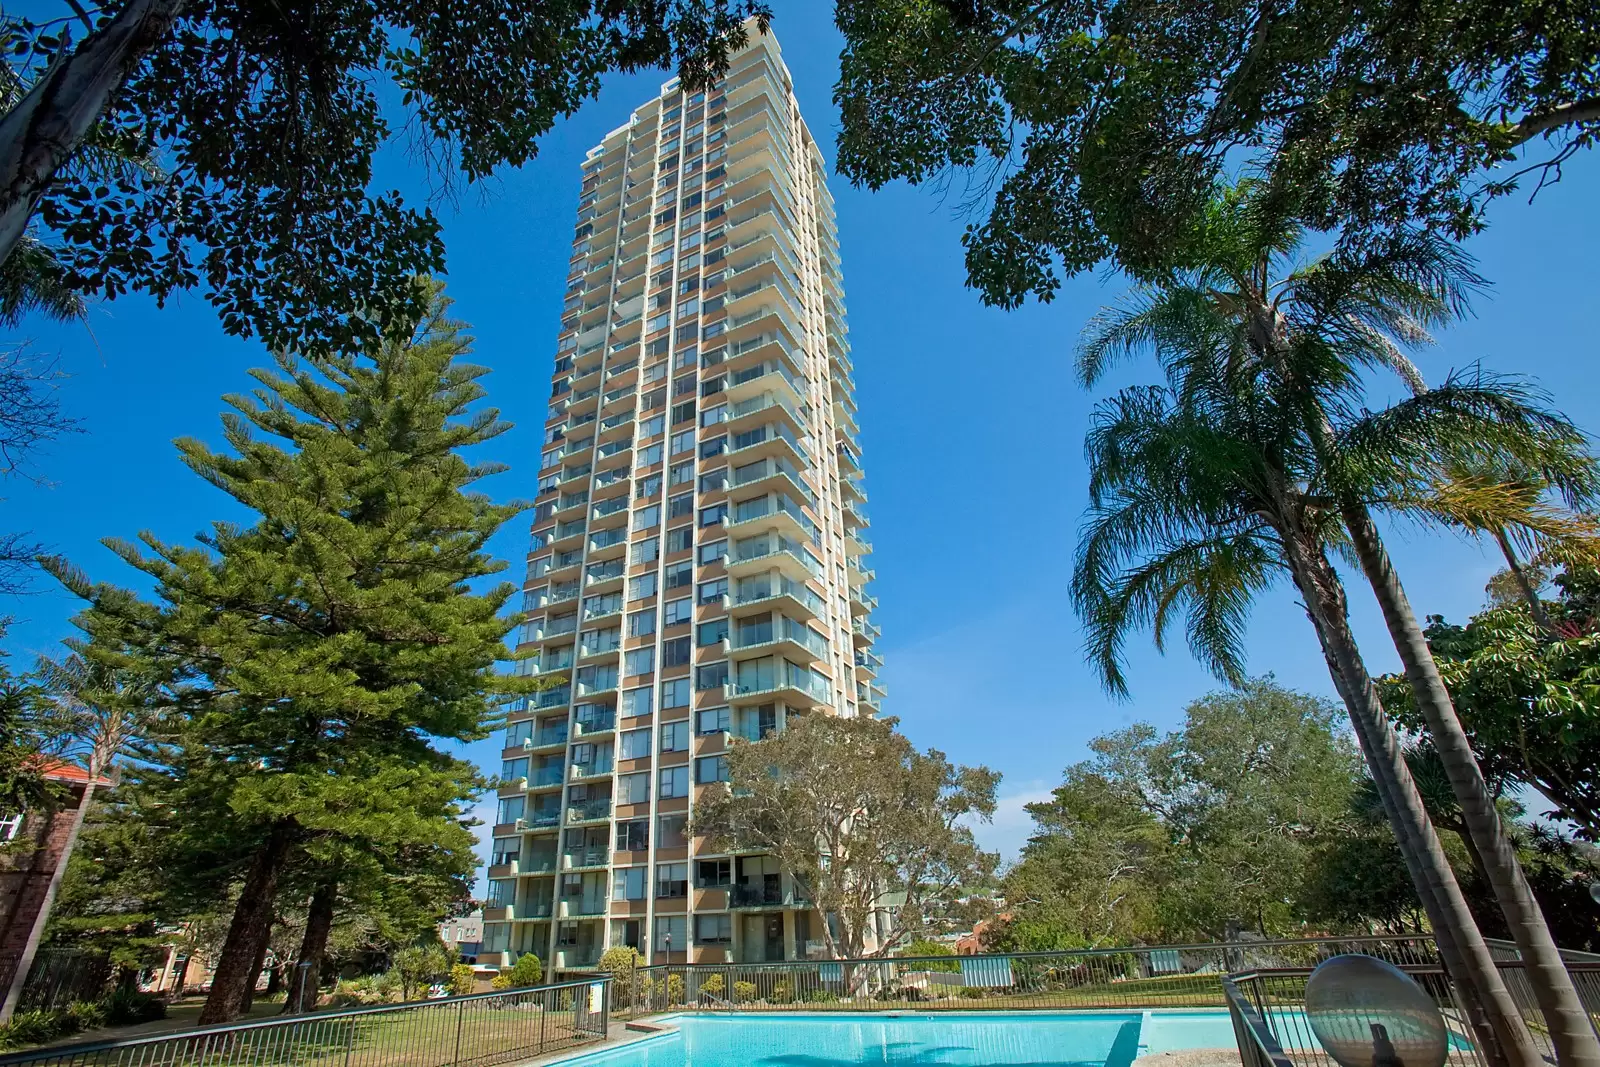 Photo #15: 18F/3 Darling Point Road, Darling Point - Sold by Sydney Sotheby's International Realty